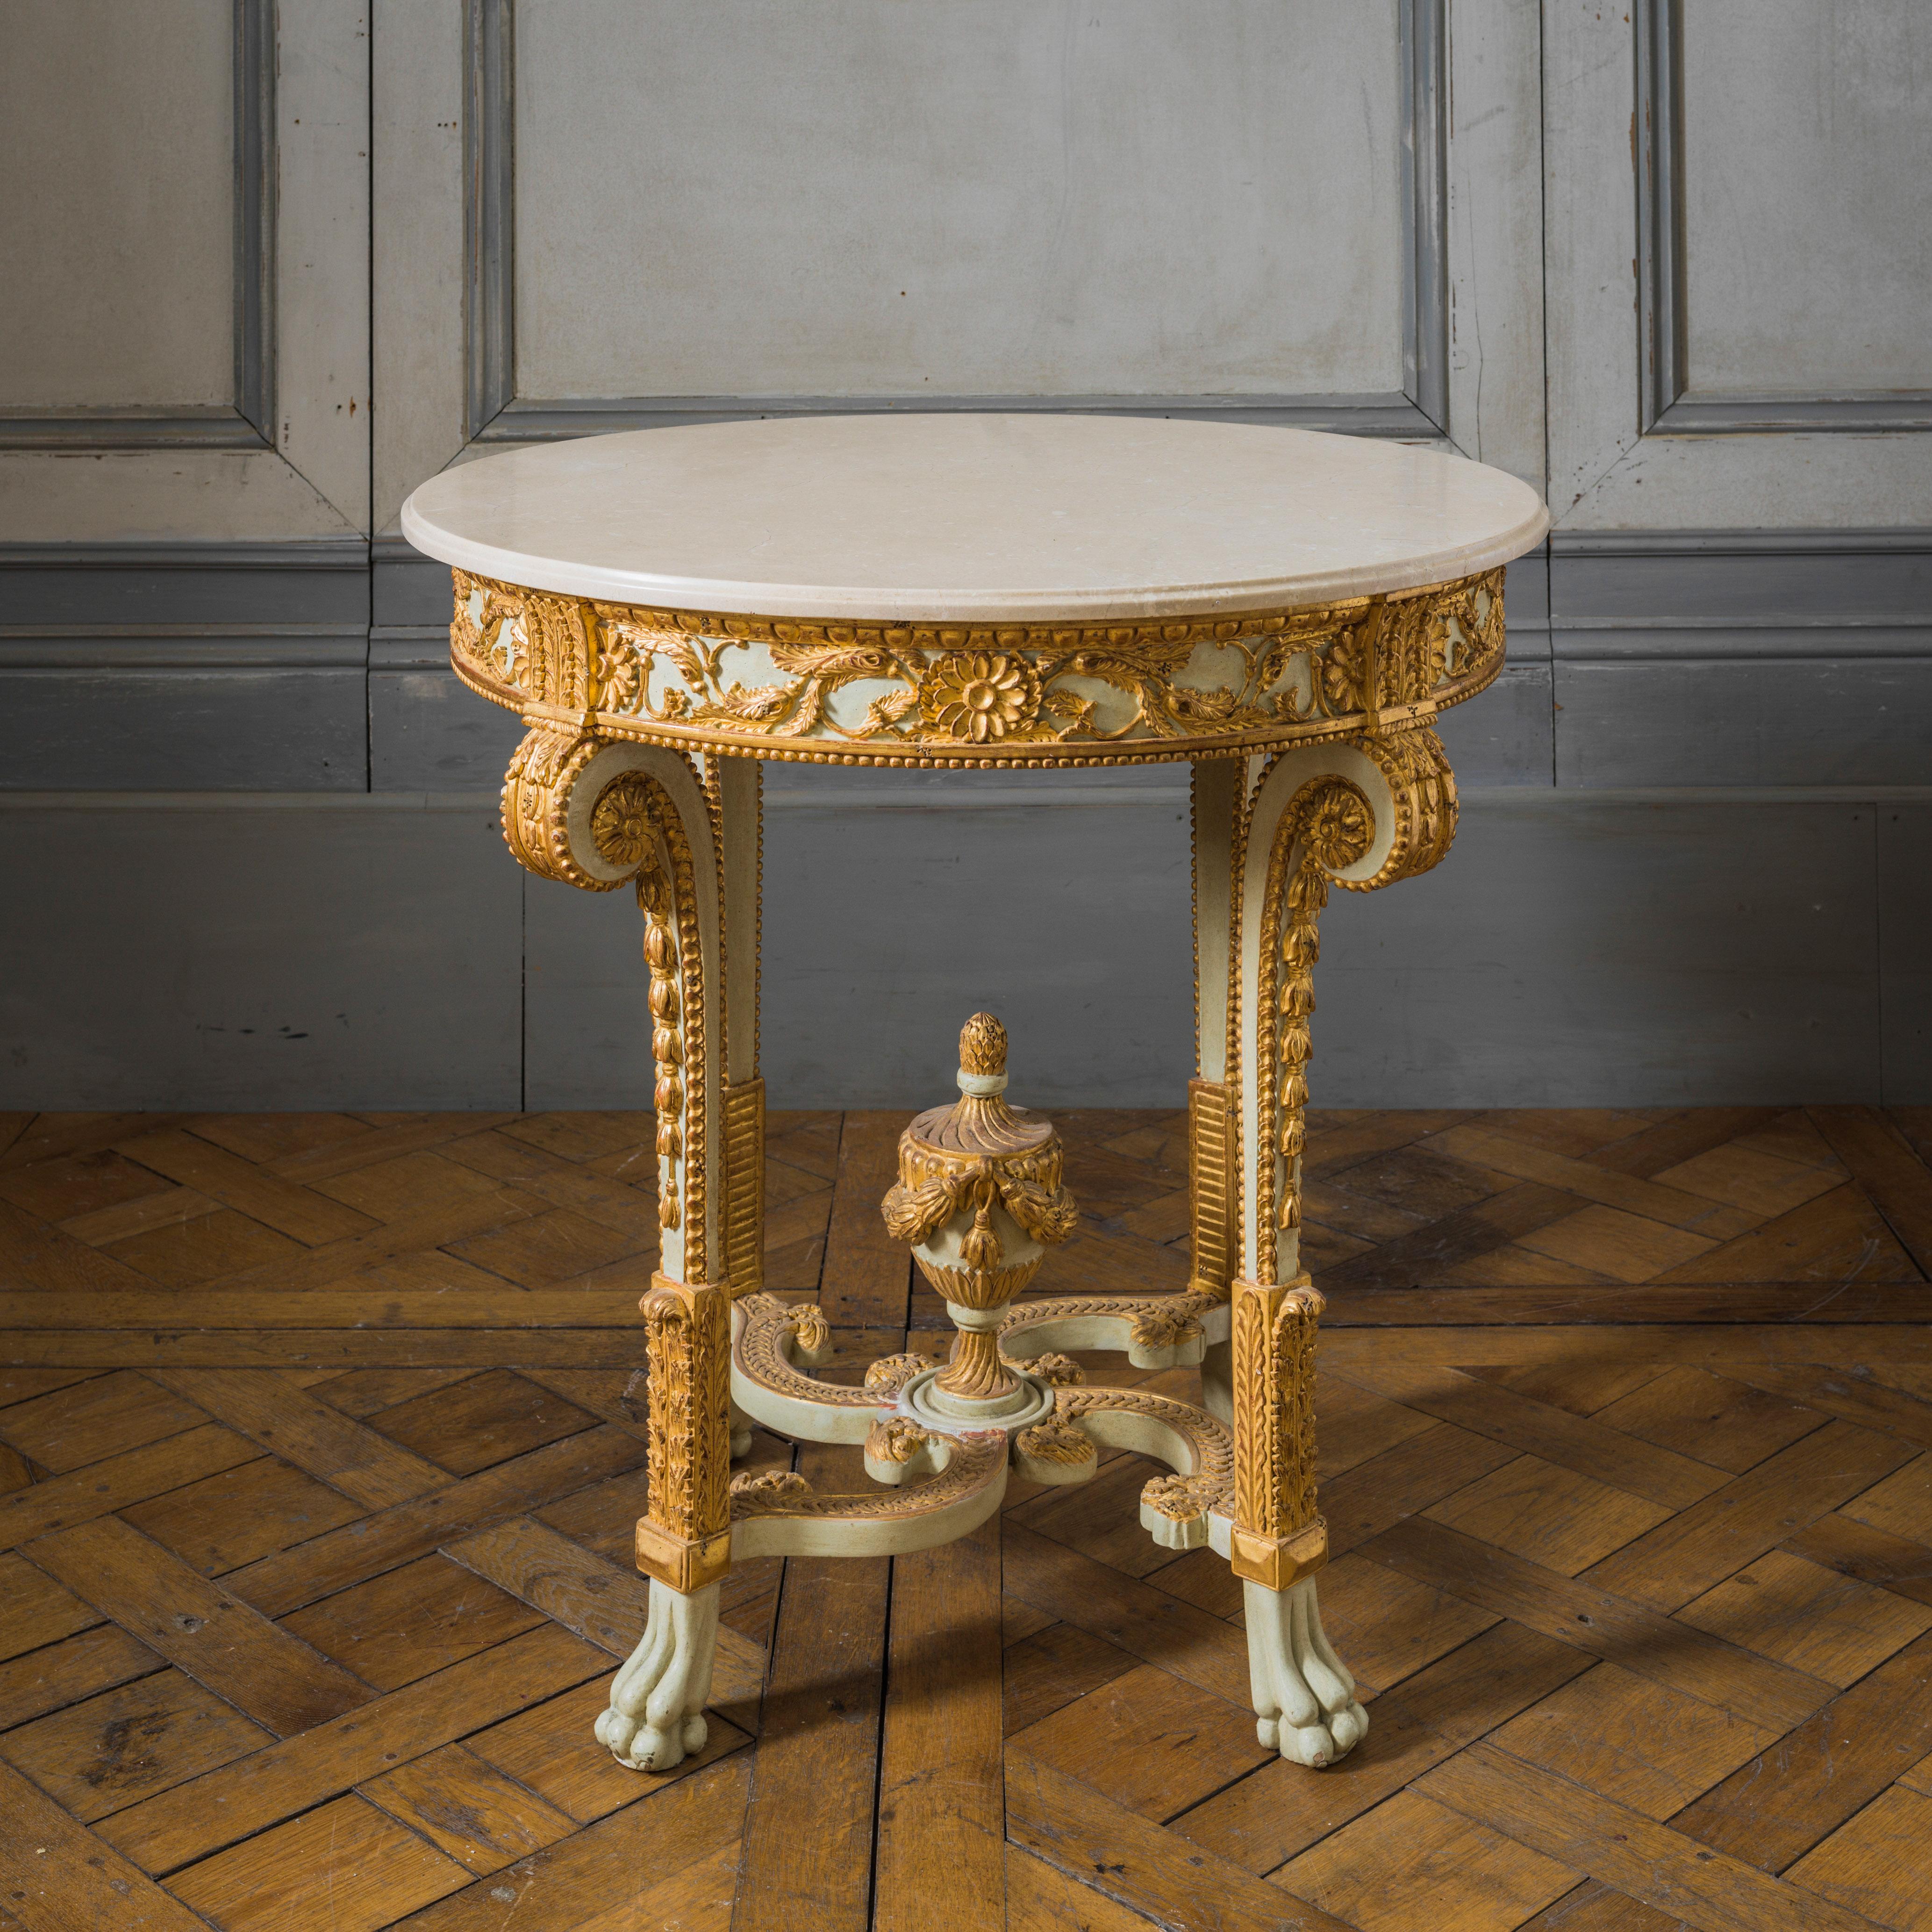 Louis XVI style round console table. Hand-carved by master craftsmen and hand finished in an aged polychrome gilded and ecru/white patina made using traditional methods and materials. 
Crema Marfill 20mm honed, sealed and Waxed marble top with a